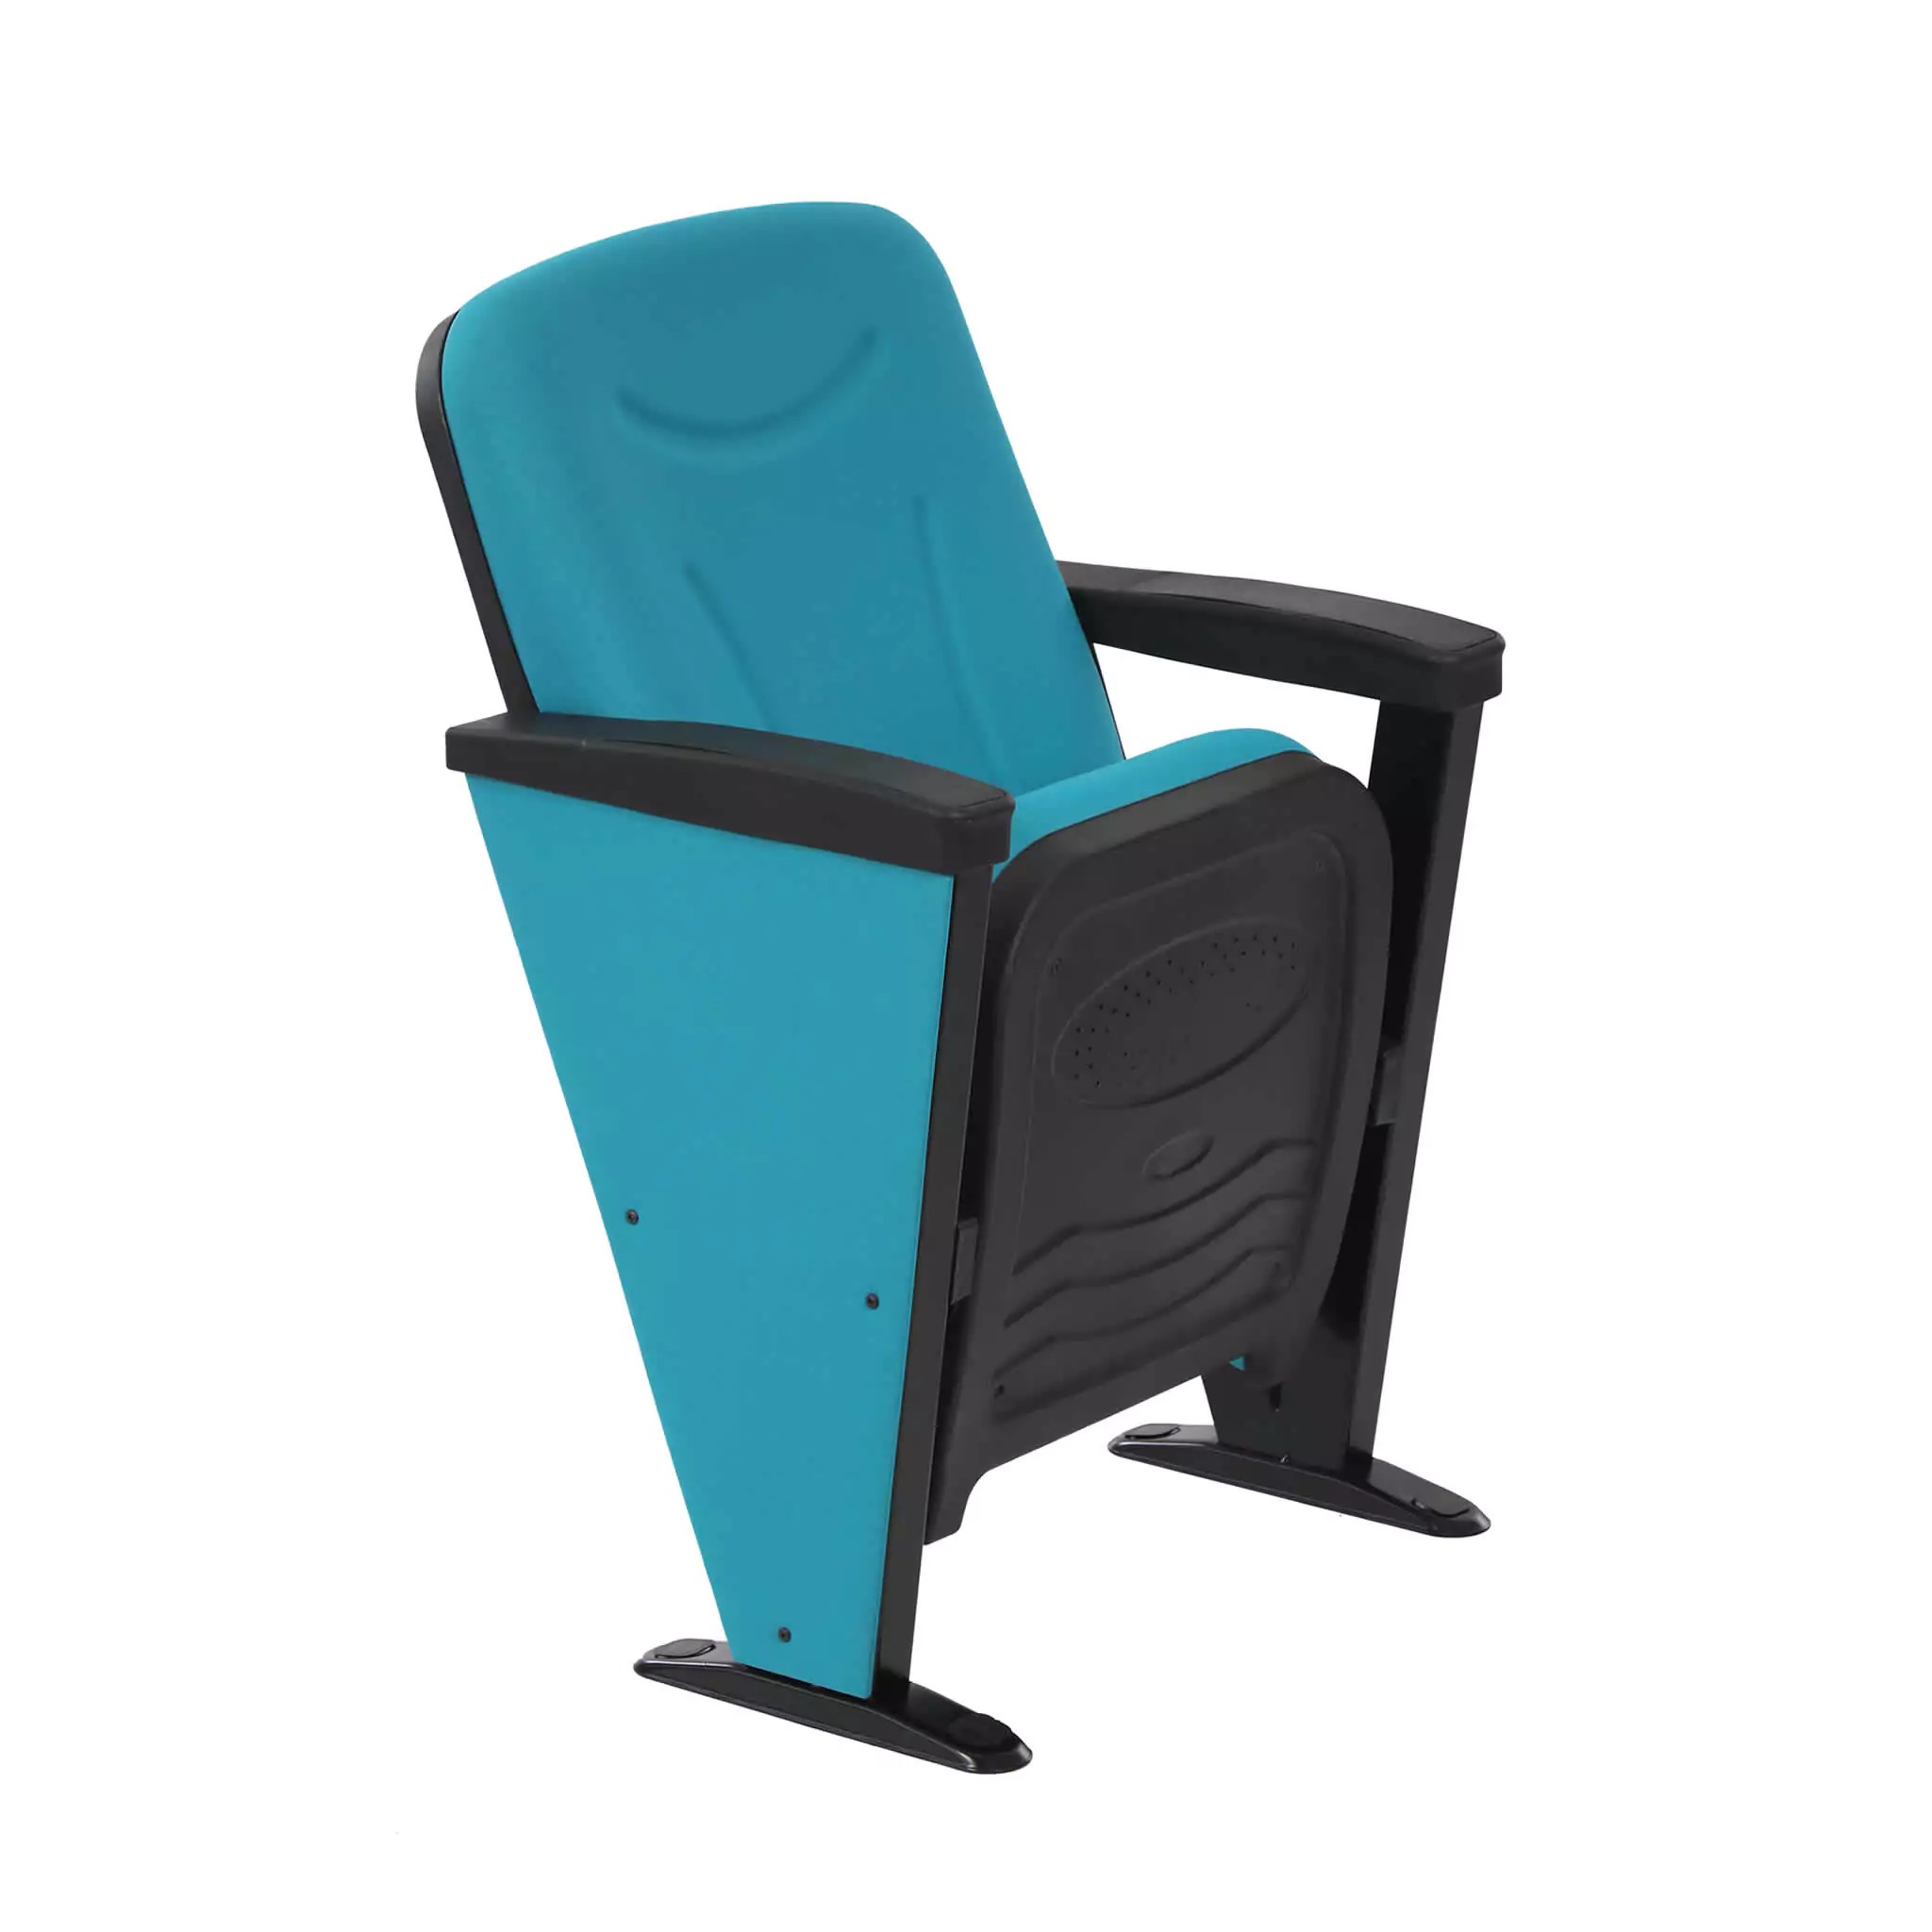 Simko Seating Product Conference Seat Zirkon S V 02